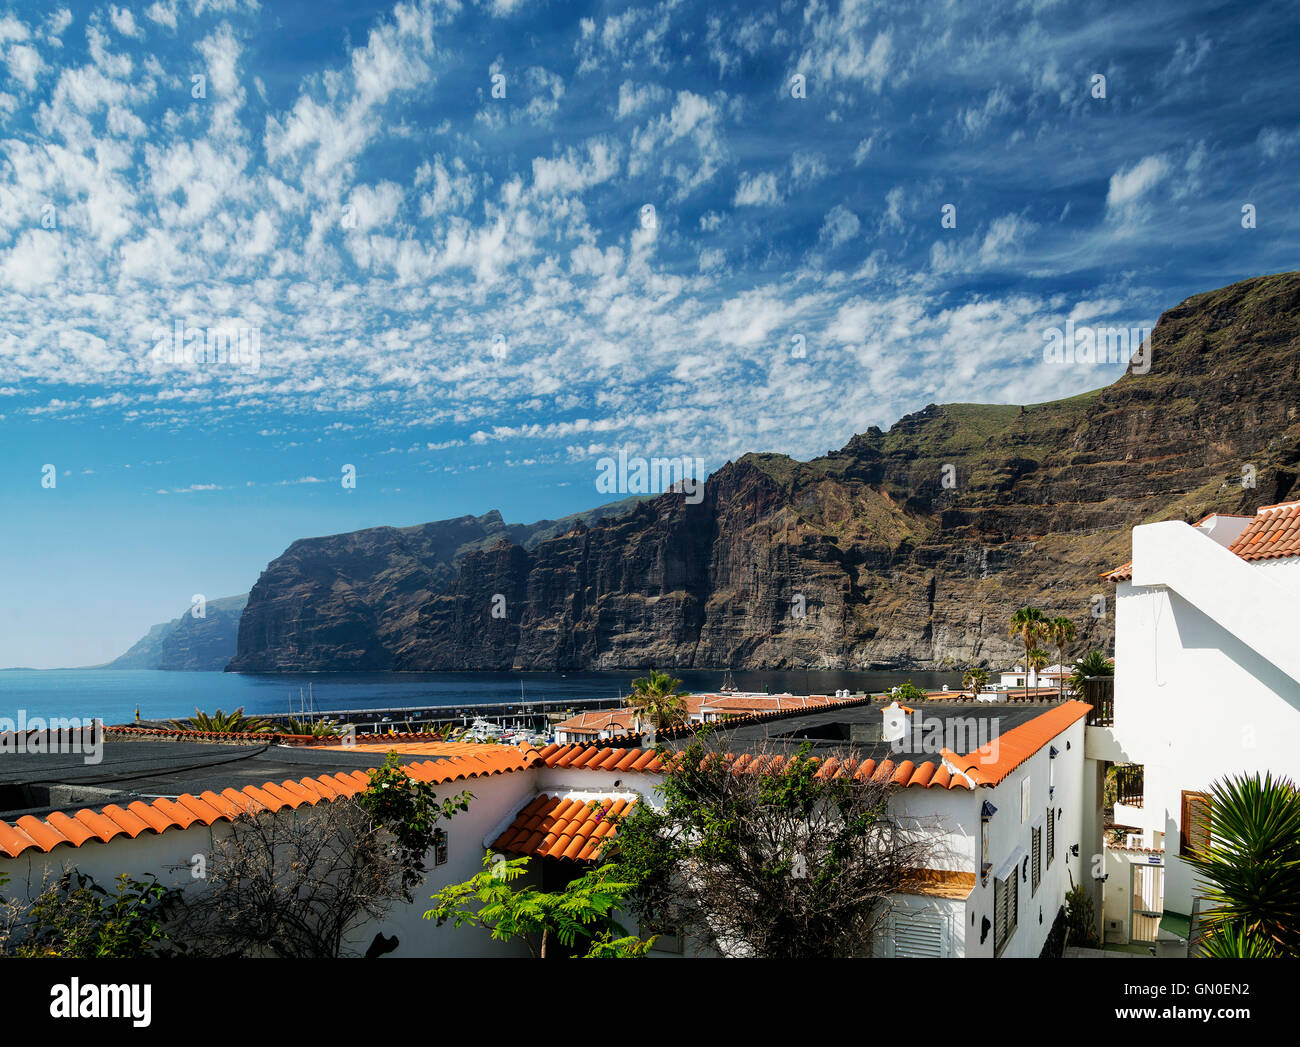 los gigantes cliffs famous landmark and village in south tenerife island spain Stock Photo